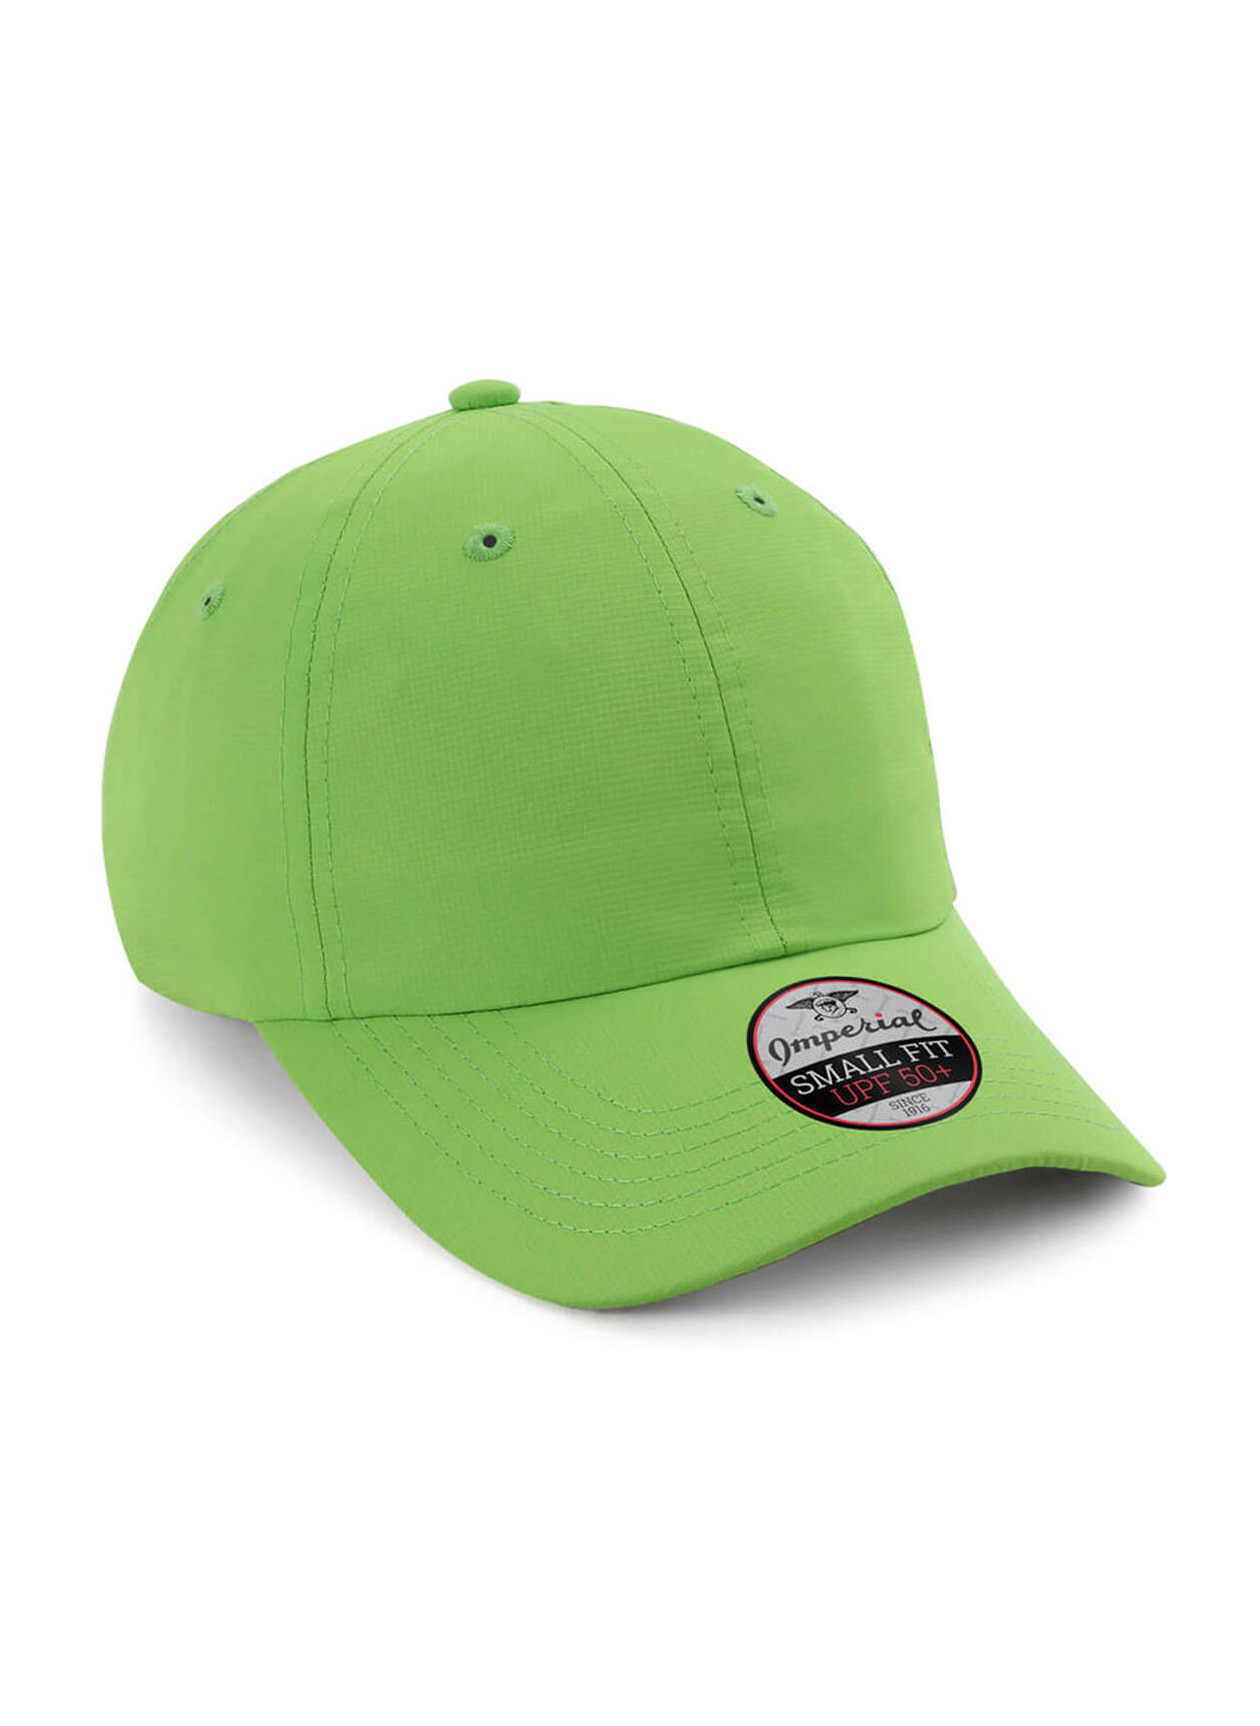 Imperial Lime Original Small Fit Performance Hat